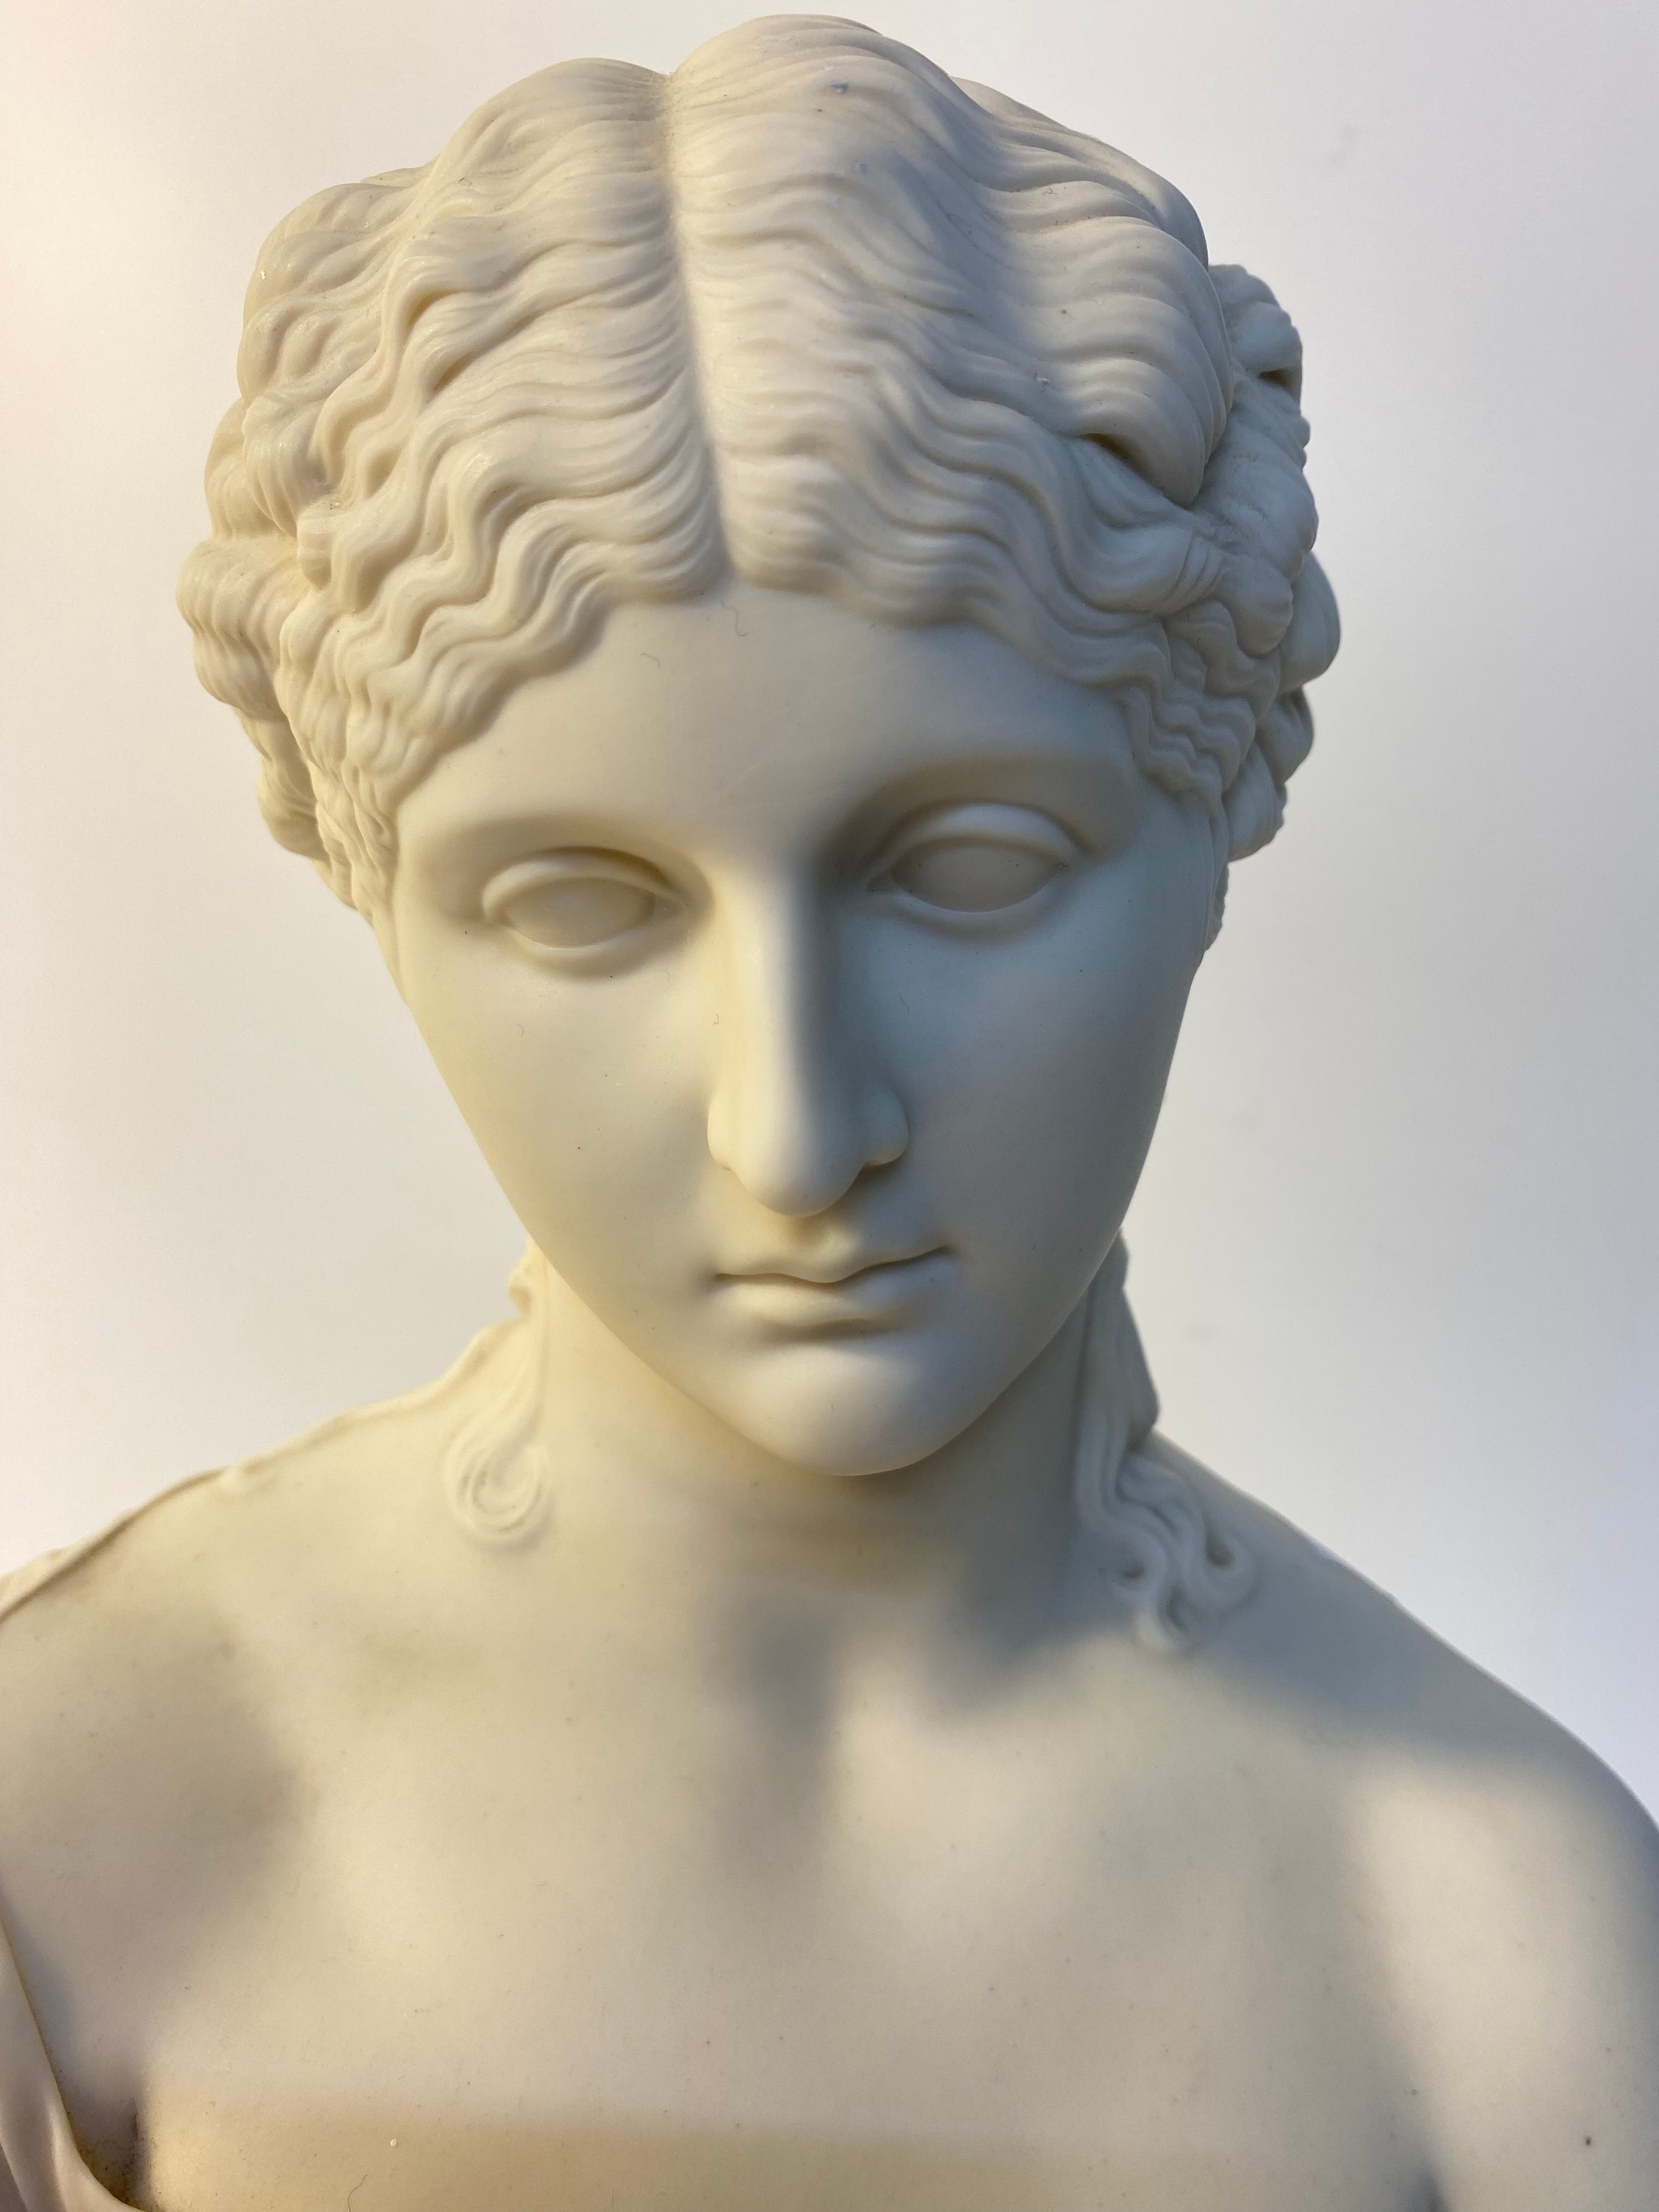 Parian Ware Bust Of Clytie Sculpted By C. Delpech [24x33cm] - Image 2 of 5